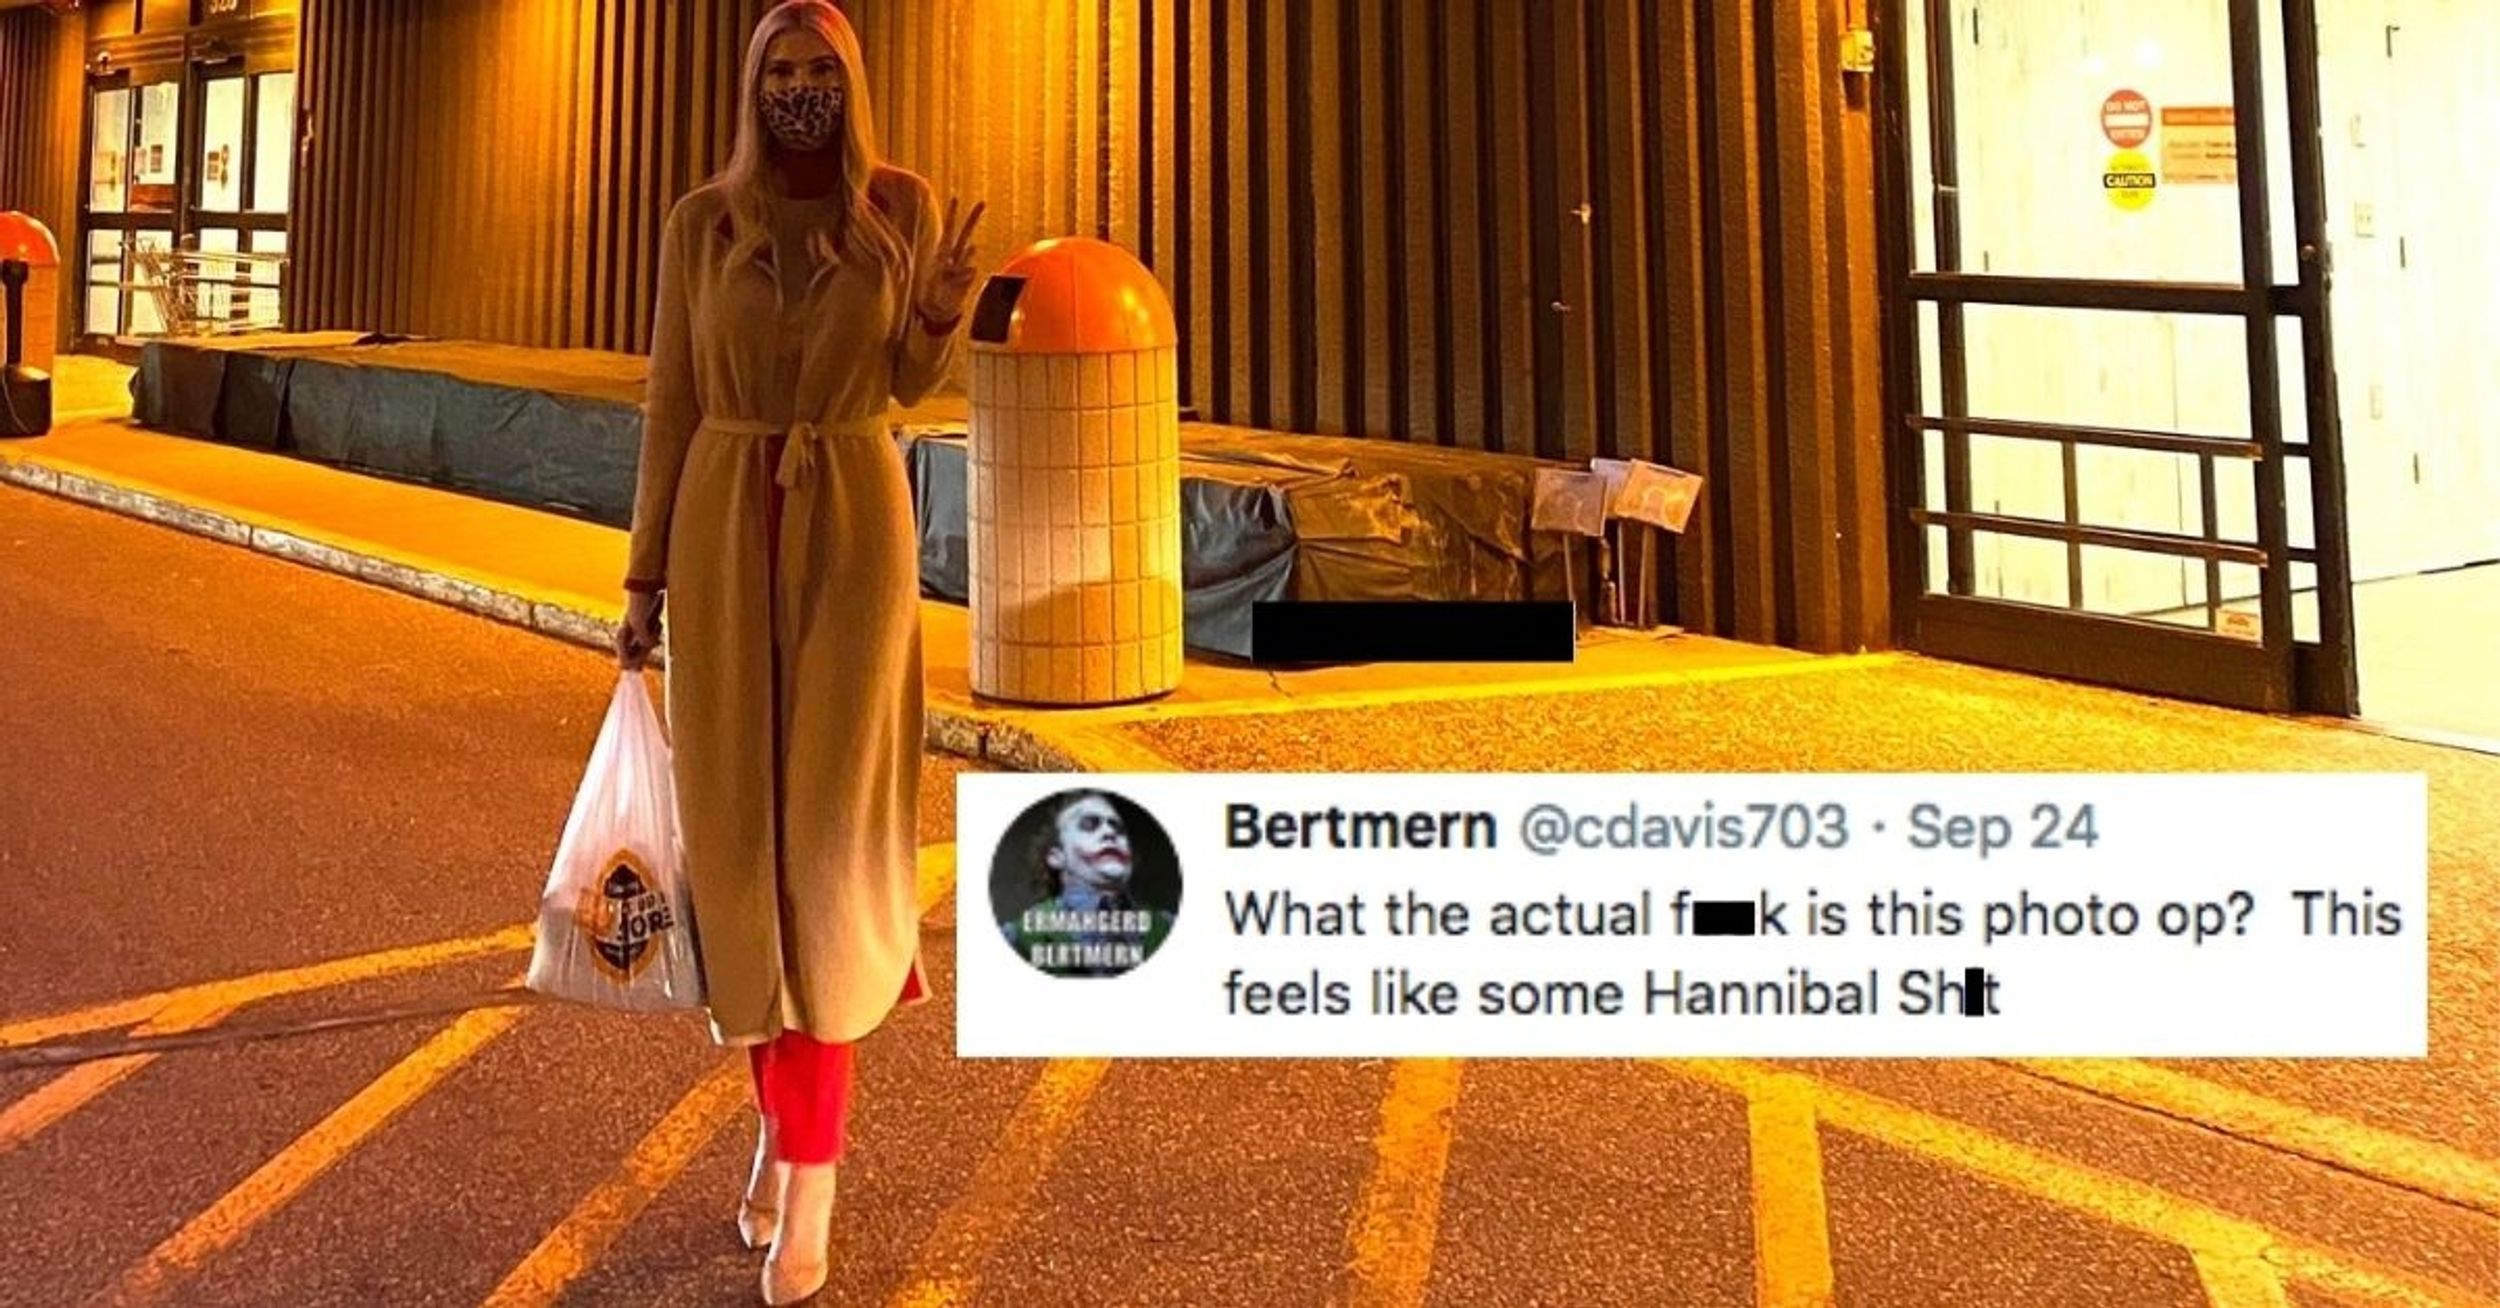 Ivanka Trump Creeps Out The Internet With Her Bizarre Shopping Trip Photo Op In Minnesota